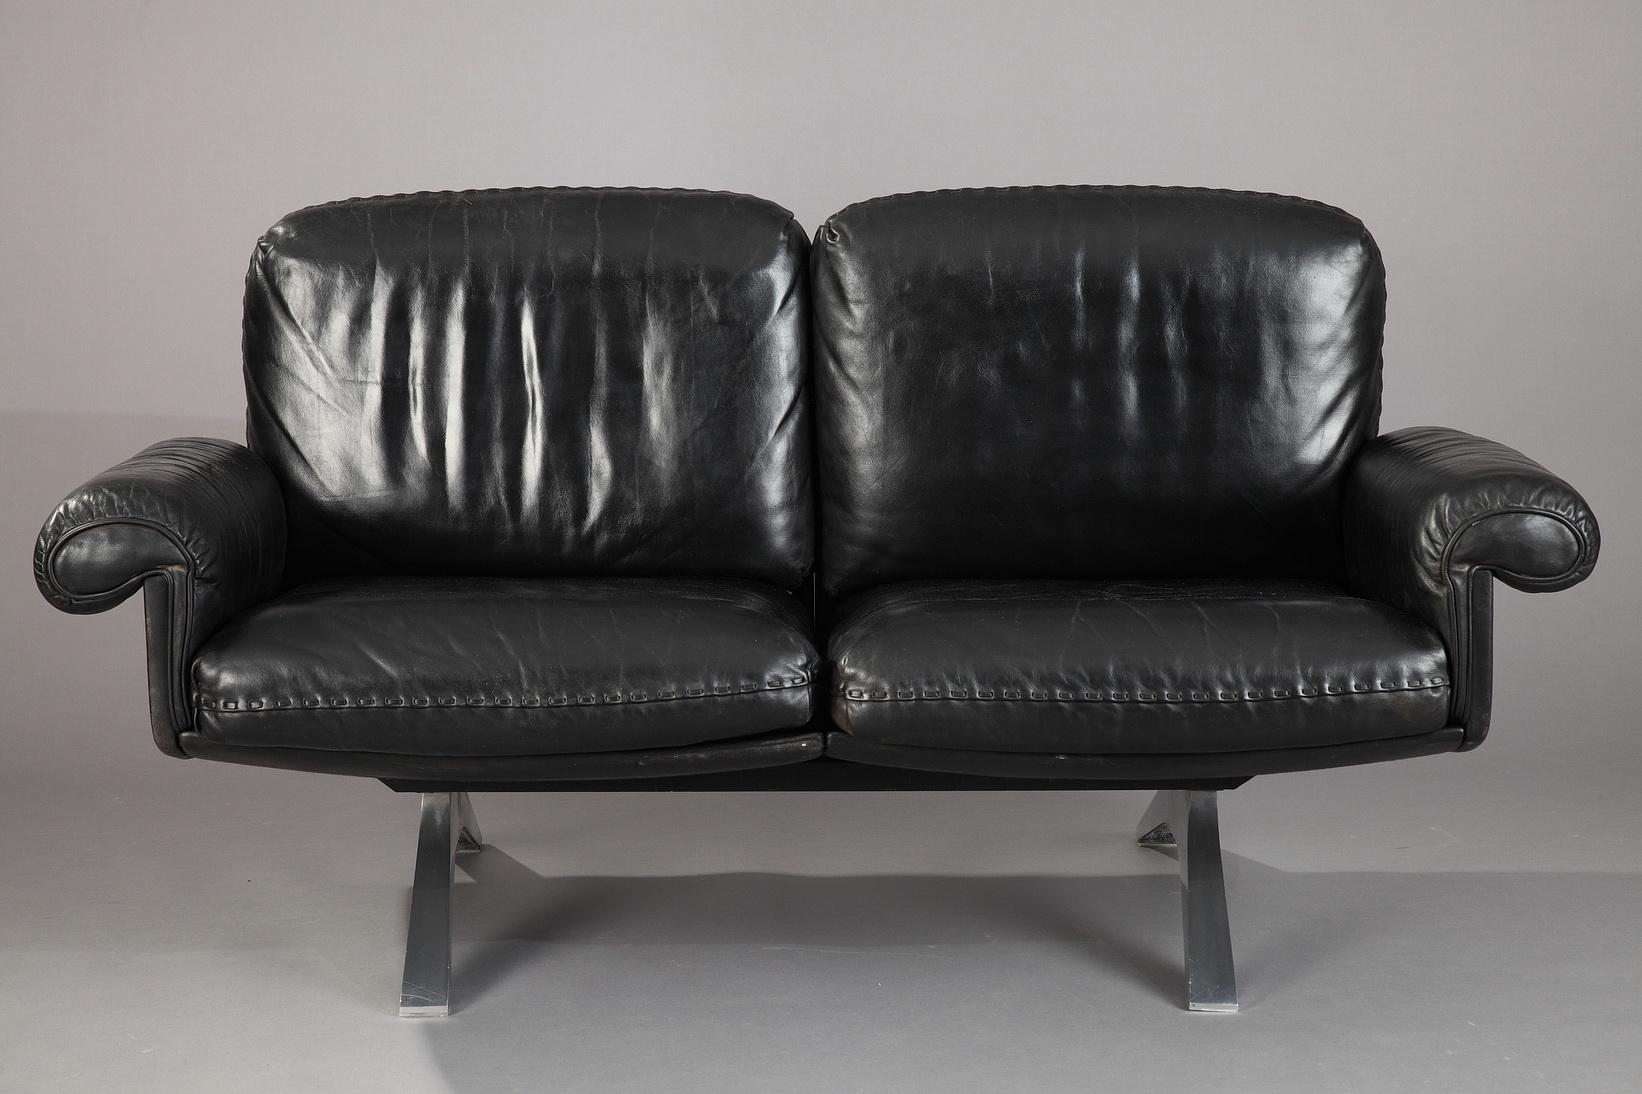 Retro De Sede DS 31 living room set composed of a two-seat sofa and a swivel lounge armchair with its ottoman. Manufactured in the 1970s by De Sede craftsman from Switzerland, these pieces are in soft black leather upholstery, with chrome-plated